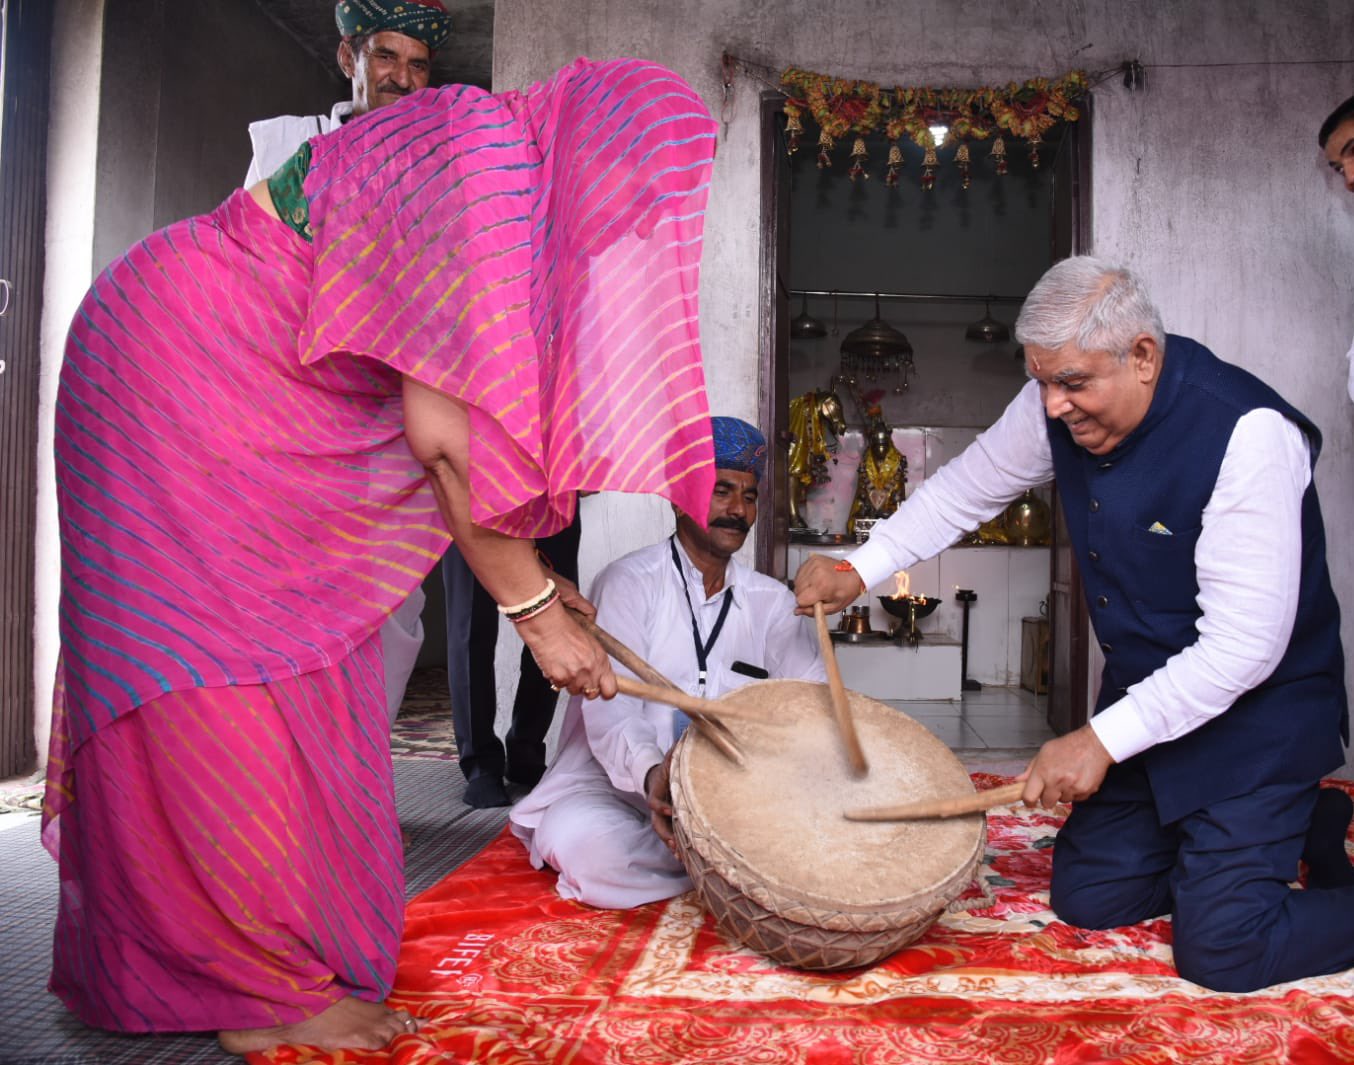 The Vice President, Shri Jagdeep Dhankhar, and Dr. Sudesh Dhankhar visiting the birthplace of Veer Tejaji in Kharnal, Rajasthan on May 14, 2023.